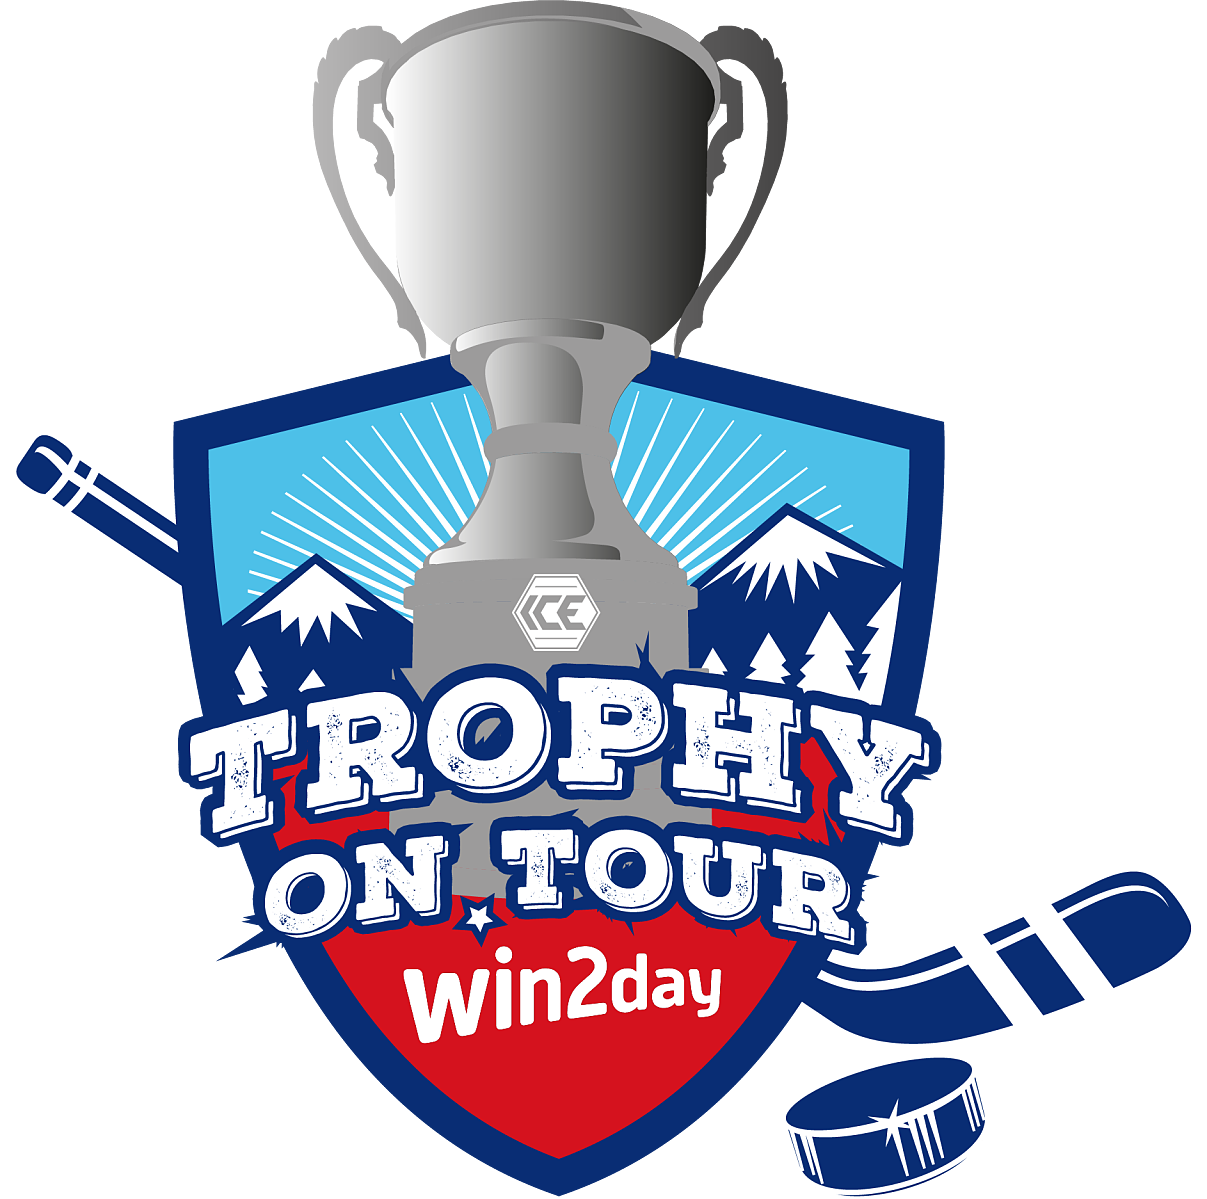 win2day_trophy on tour (1) (1)